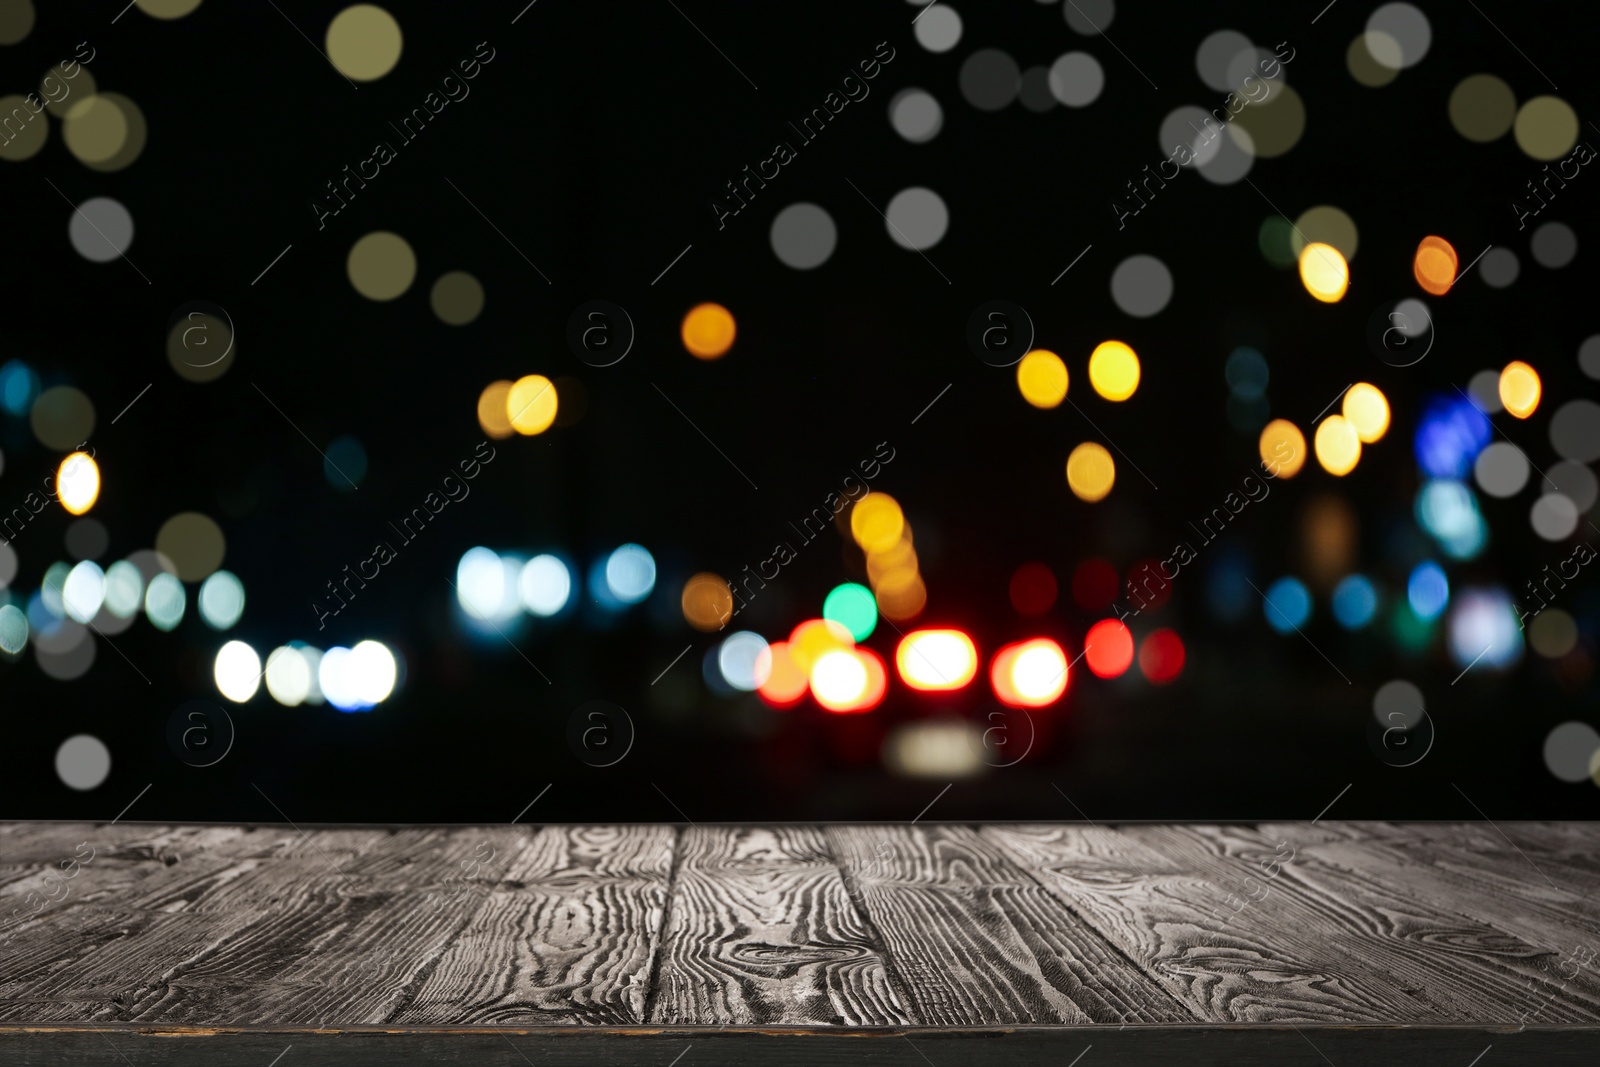 Image of Empty wooden surface against blurred Christmas lights. Bokeh effect 